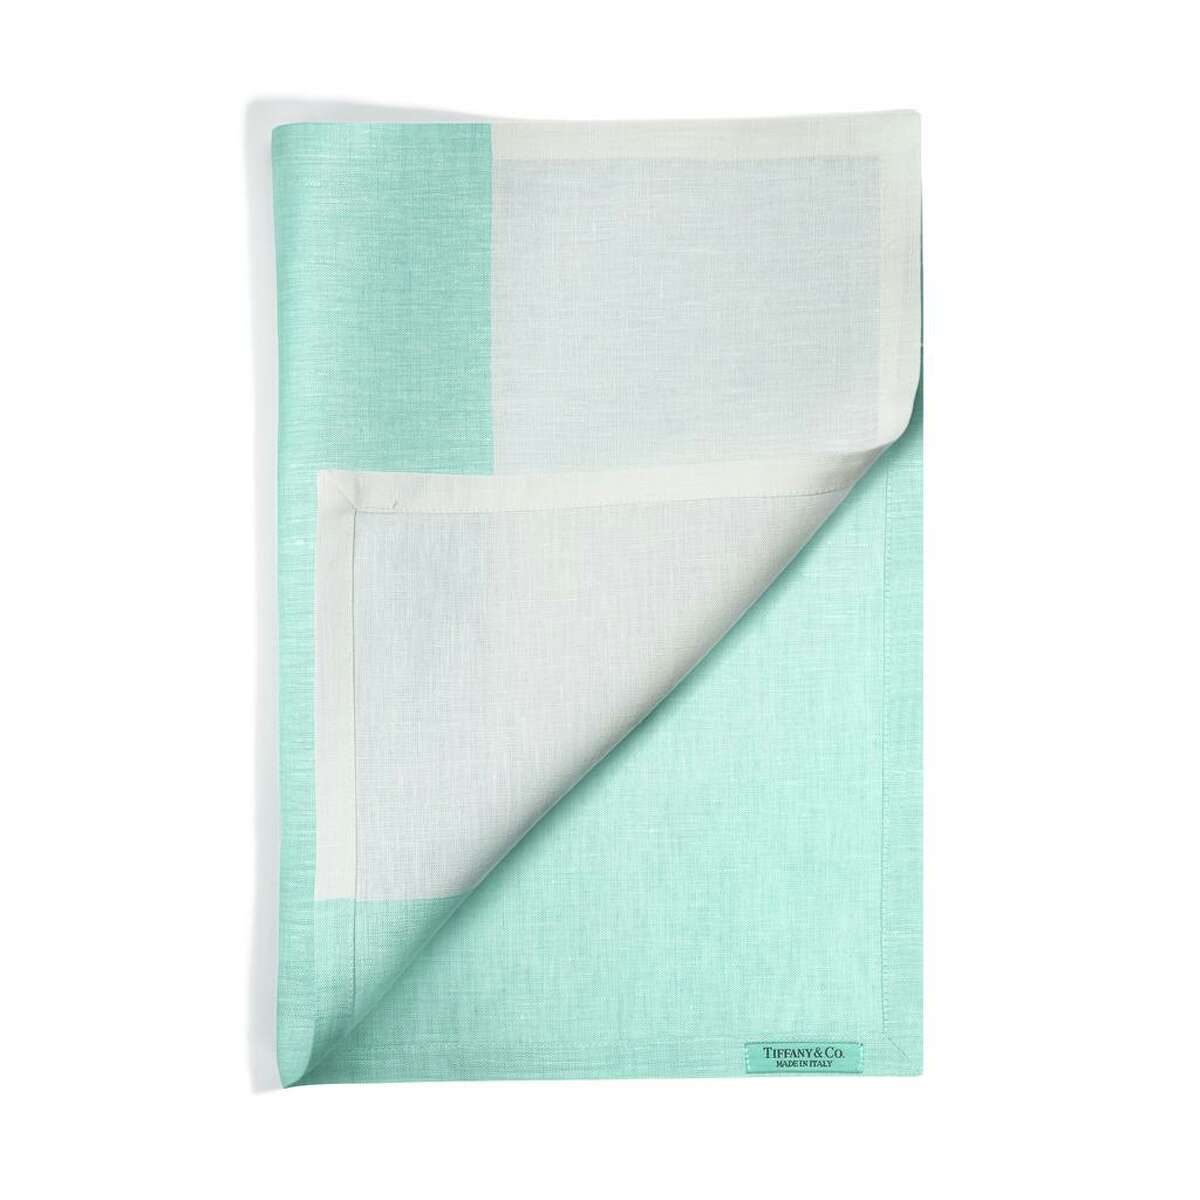 Tiffany brings a fresh and modern perspective to its Color Block Collection, blending soft ivory with its signature robin’s egg blue in dishes, napkins and placemats. $320 per place setting, $125 set of 4 napkins, $175 set of 4 placemats; Tiffany & Co.